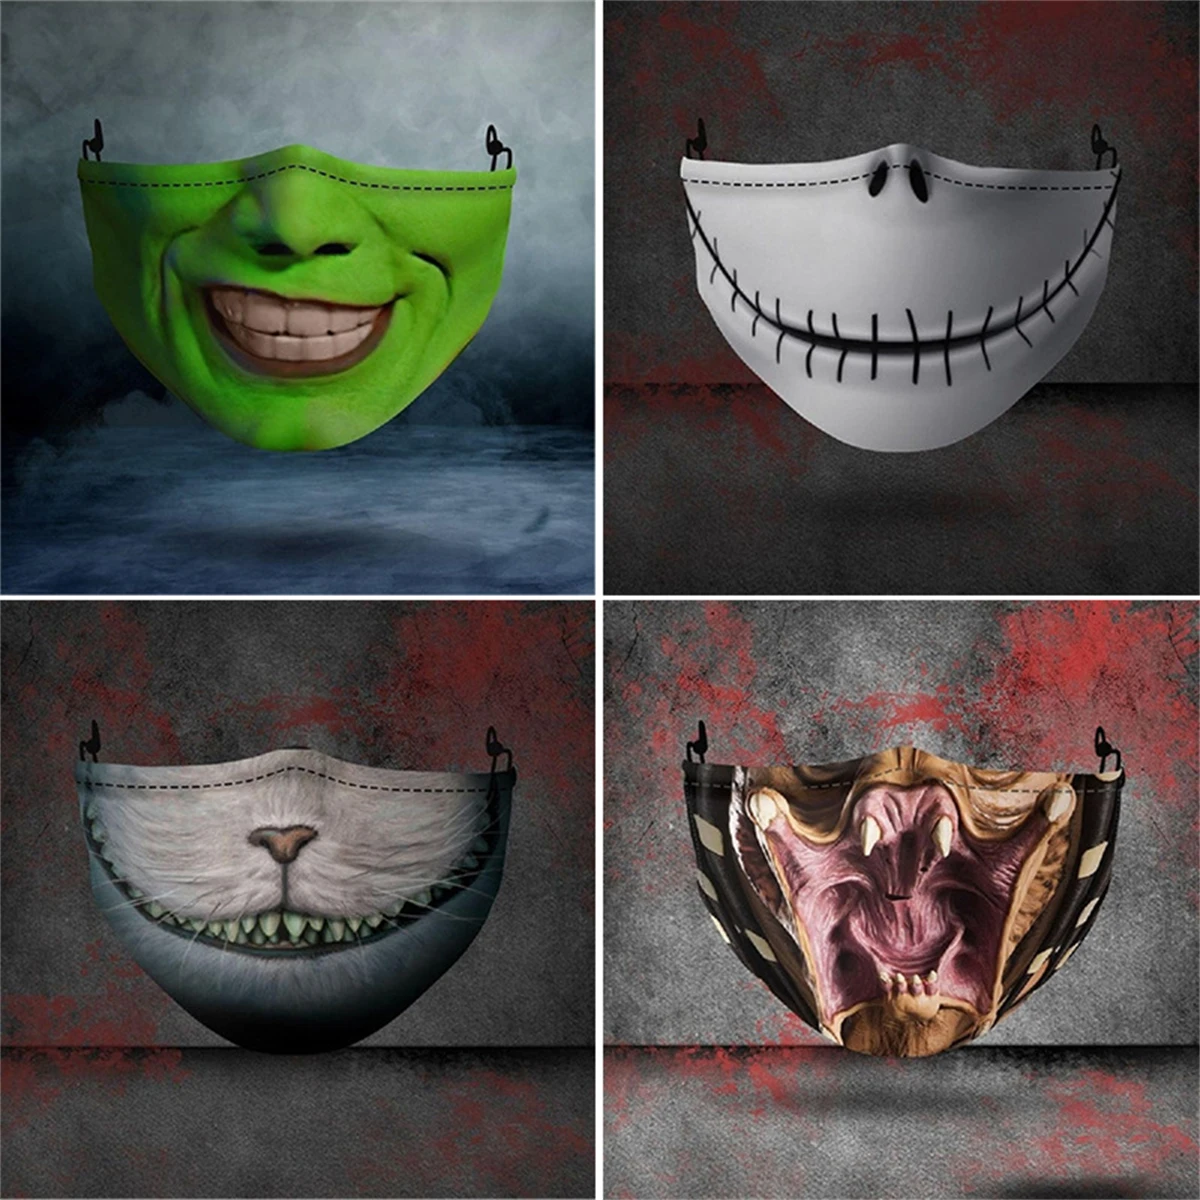 

2021 Halloween New Arrivals 21 Styles Facial Mask Adult Funny Spoof Horror Scary Dustproof Cotton Cloth Face Mask Mouth-muffle